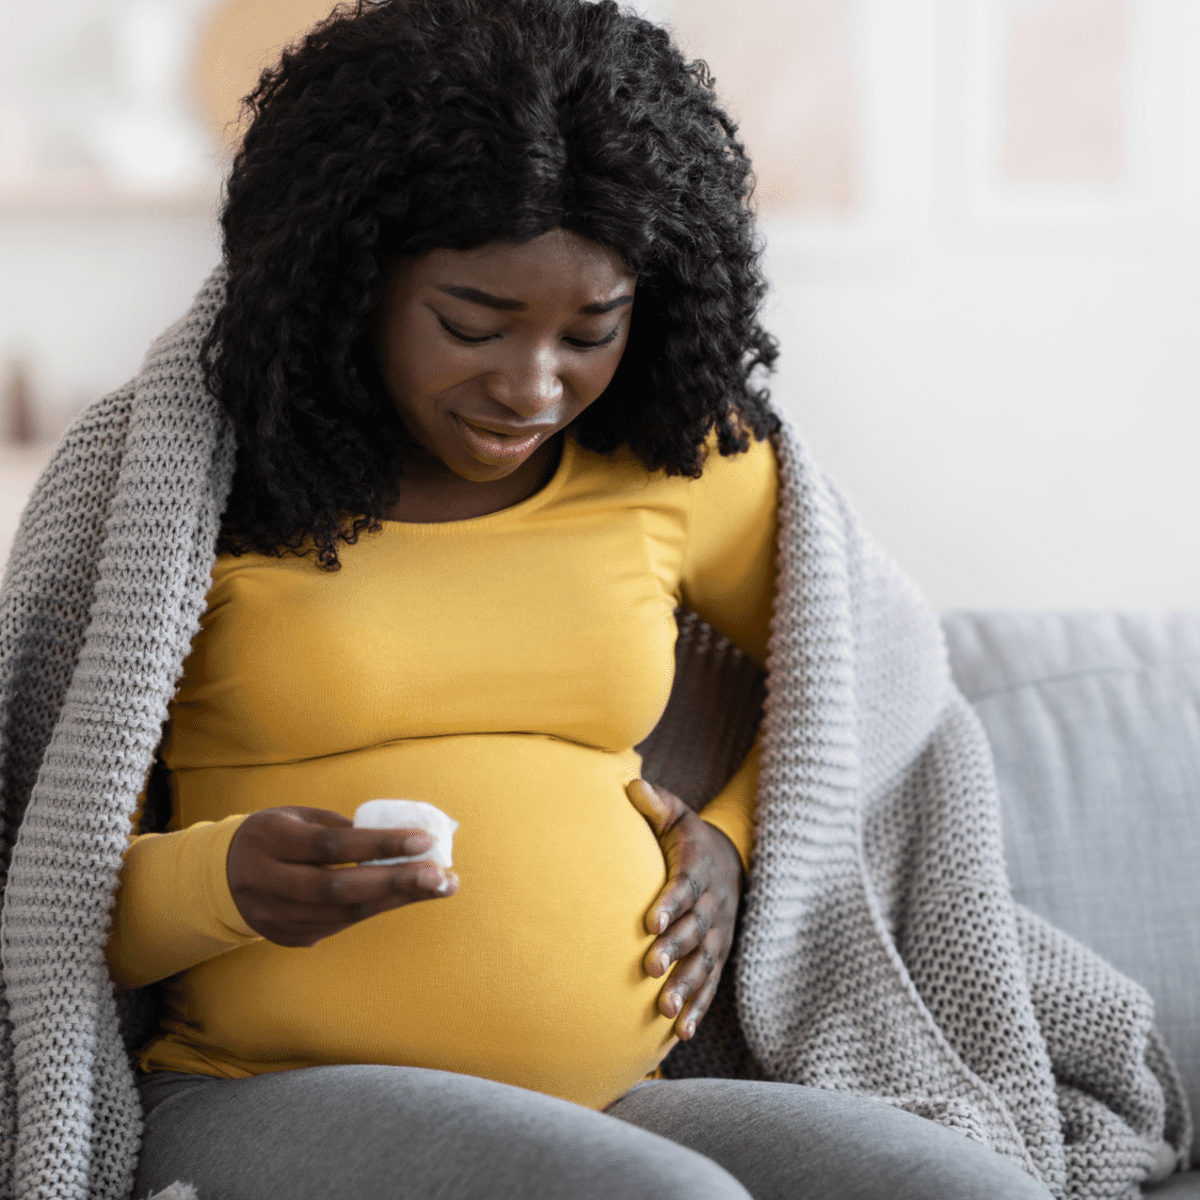 Bleeding or Spotting in Early Pregnancy: Should I Be Worried? - WeHaveKids